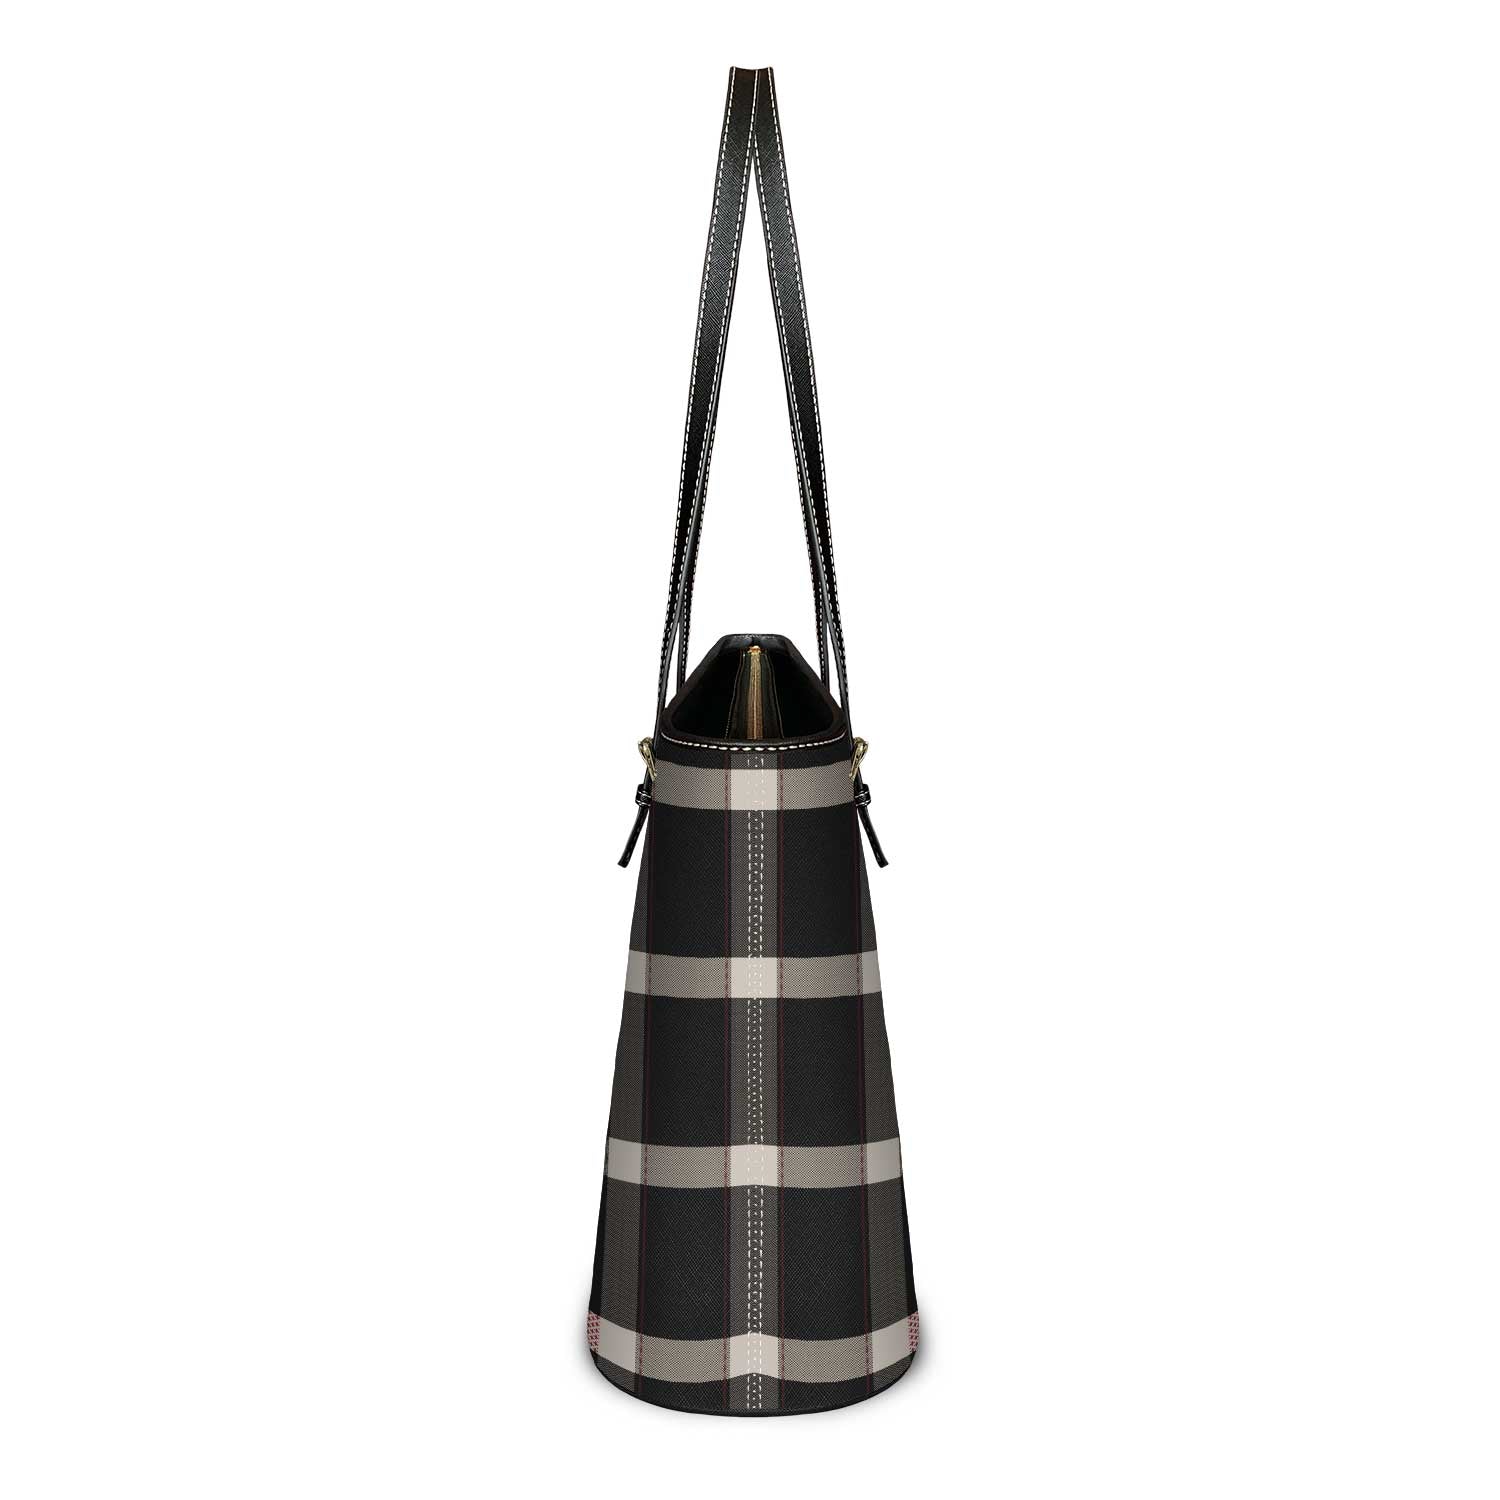 St. Clare of Assisi Tote Bag (Plaid)